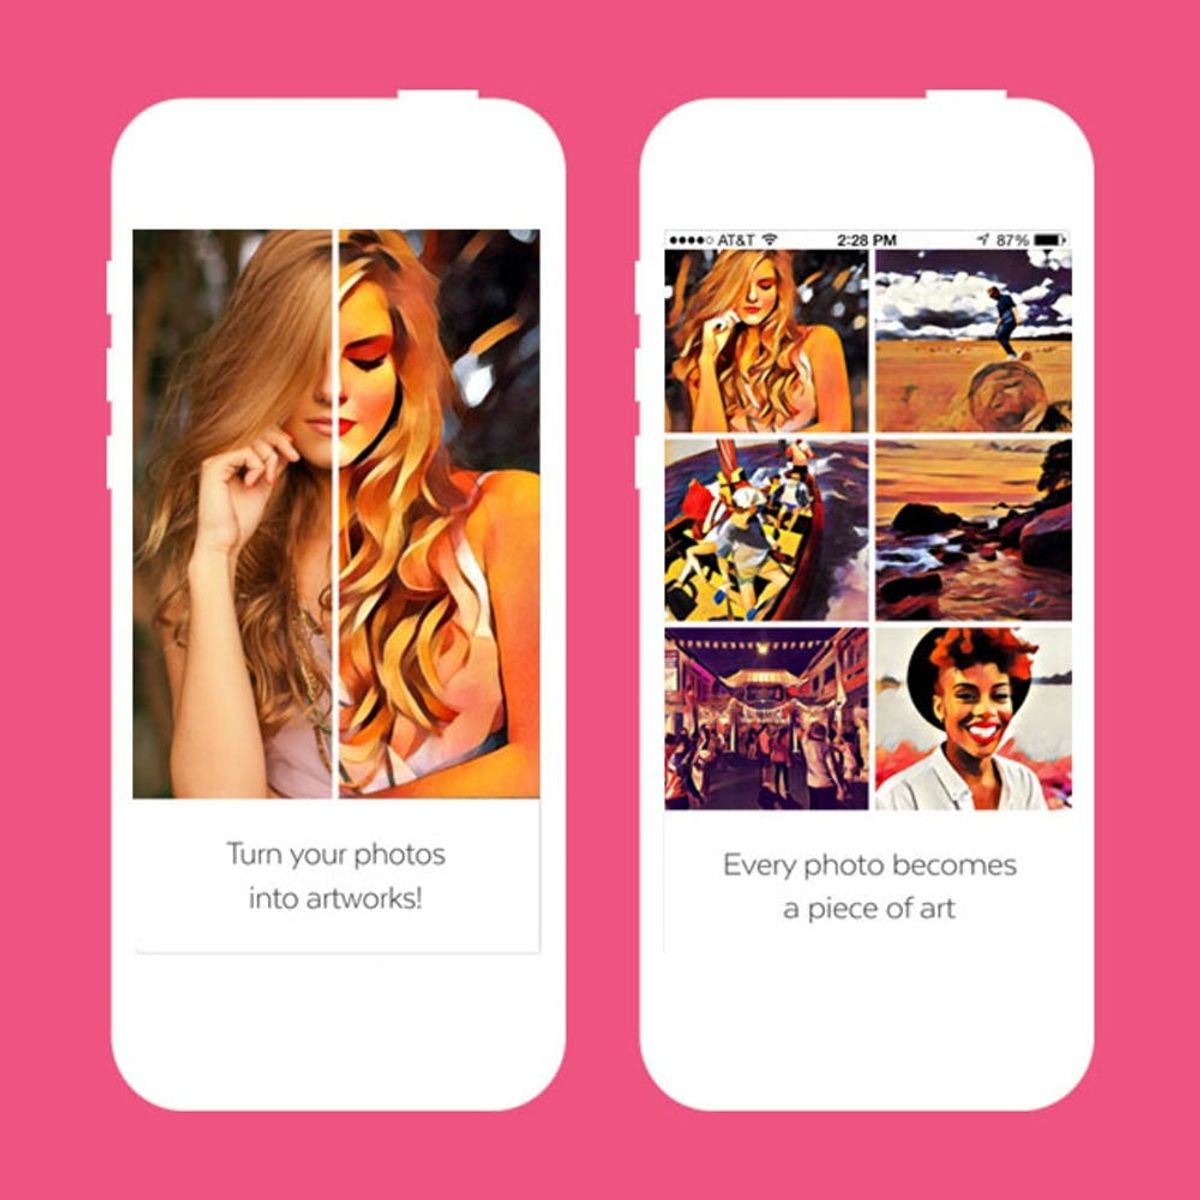 This New App Turns Your Selfies Into Art